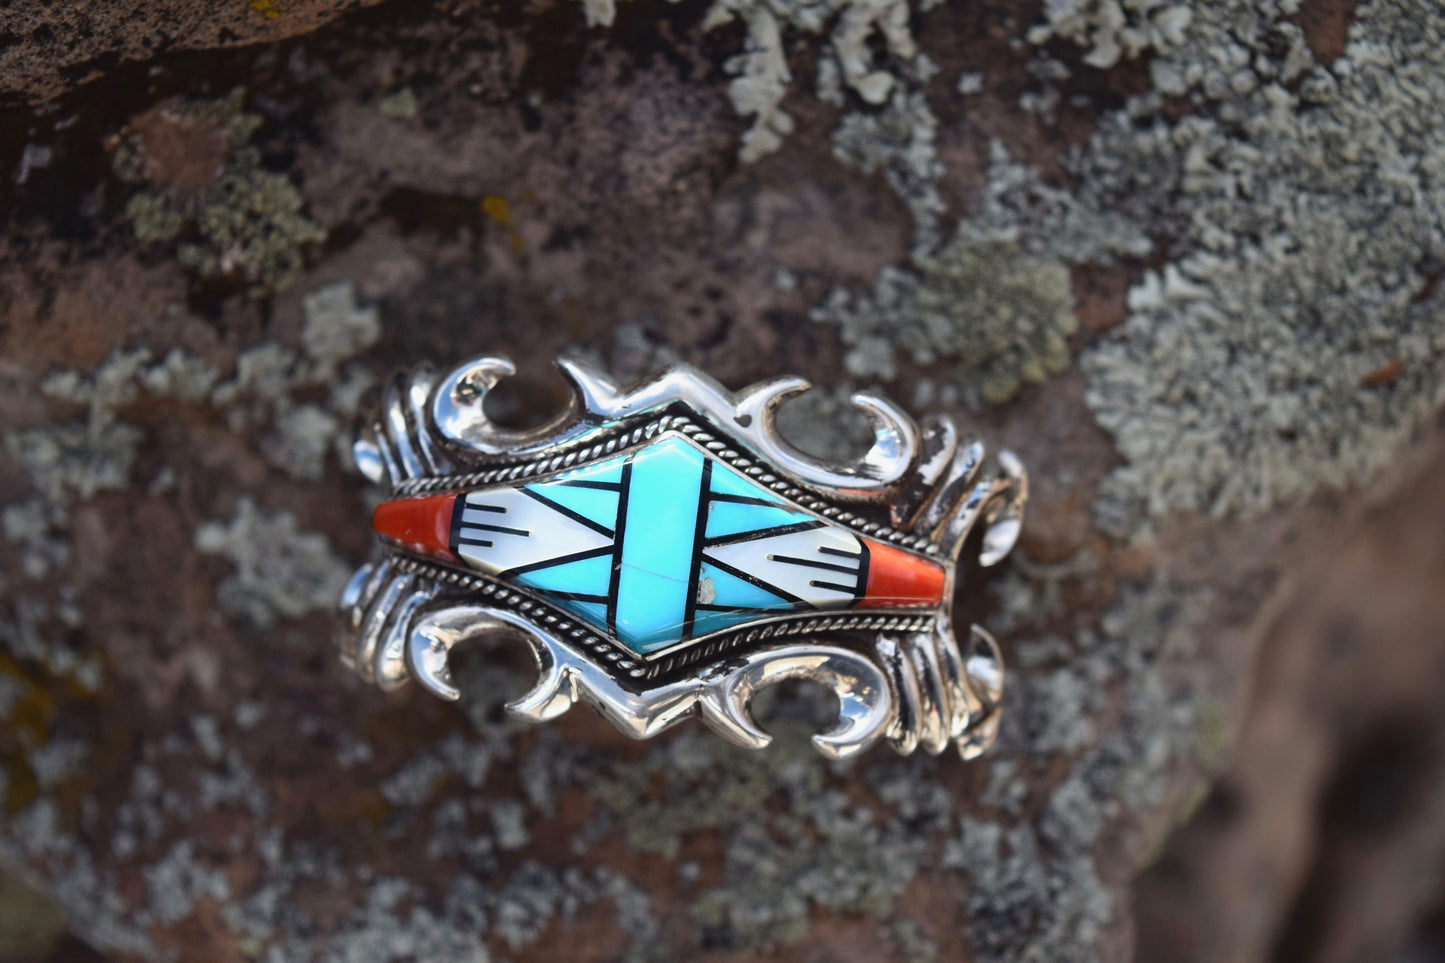 MULTICOLOR INLAY BRACELET FROM THE RODEGRS COLLECTION